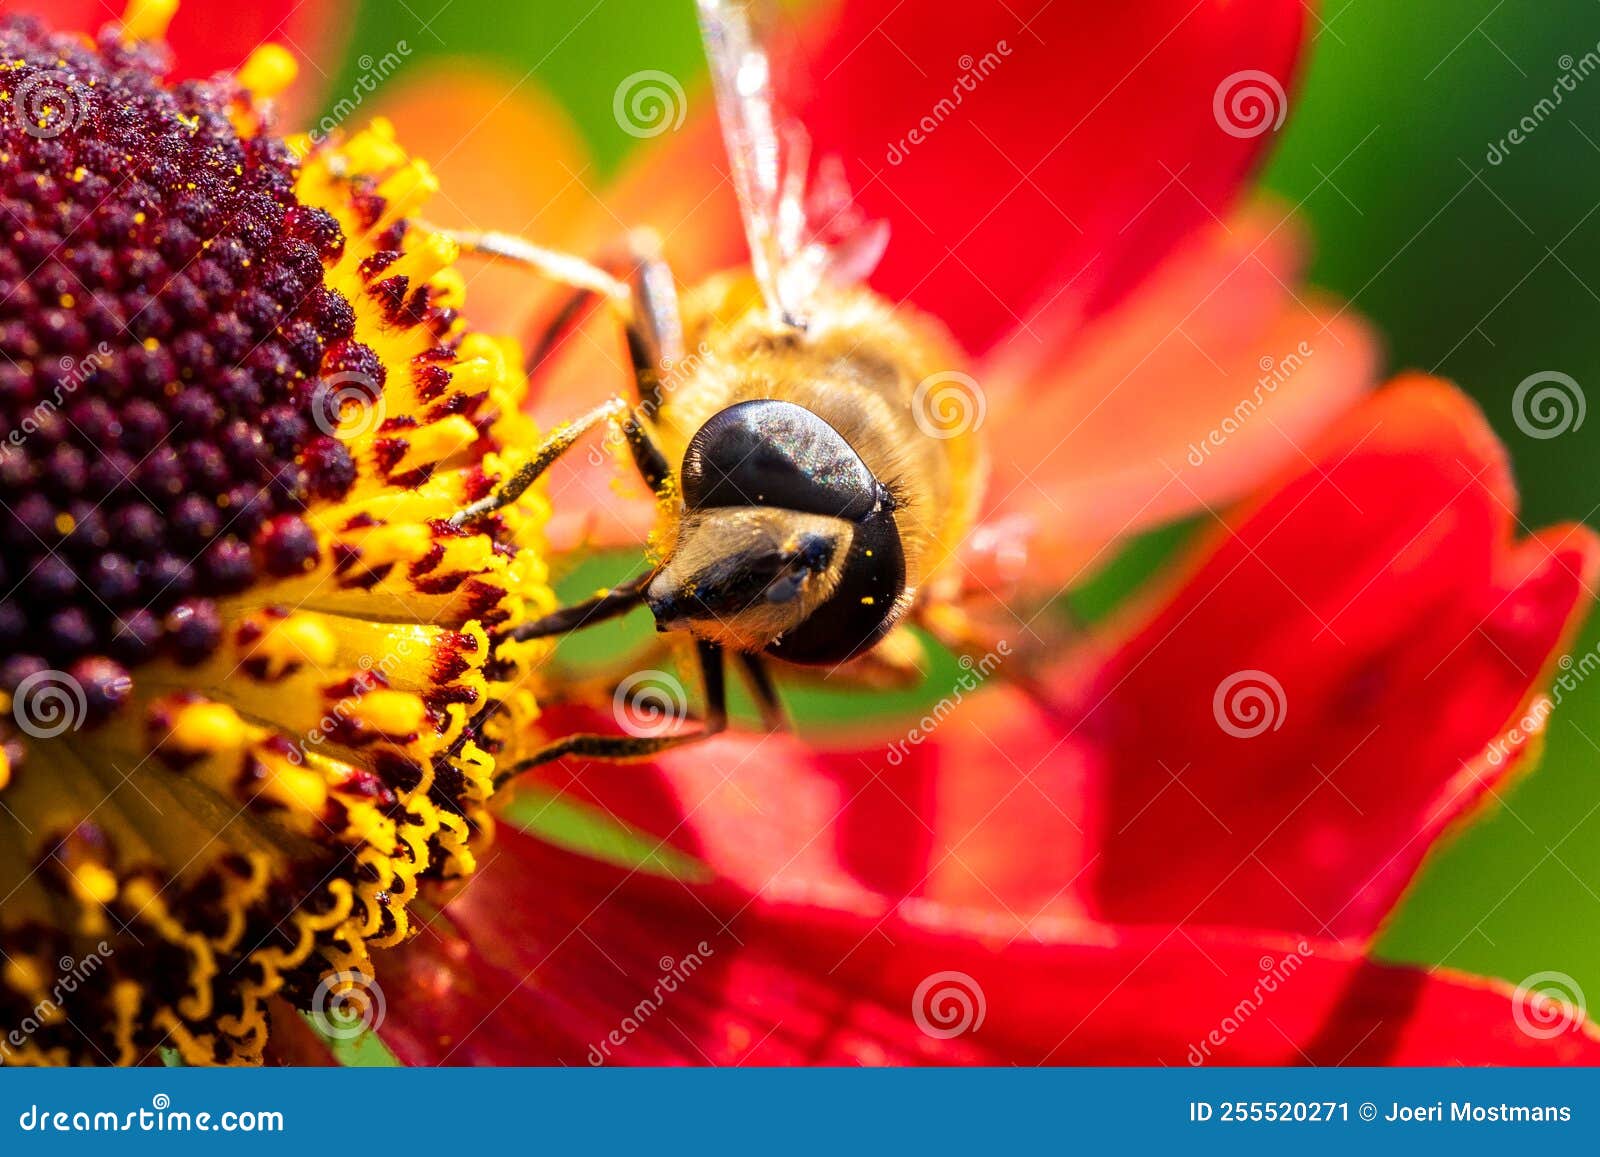 260 Emerald Bee Stock Photos Free Royalty-Free Stock Photos From Dreamstime